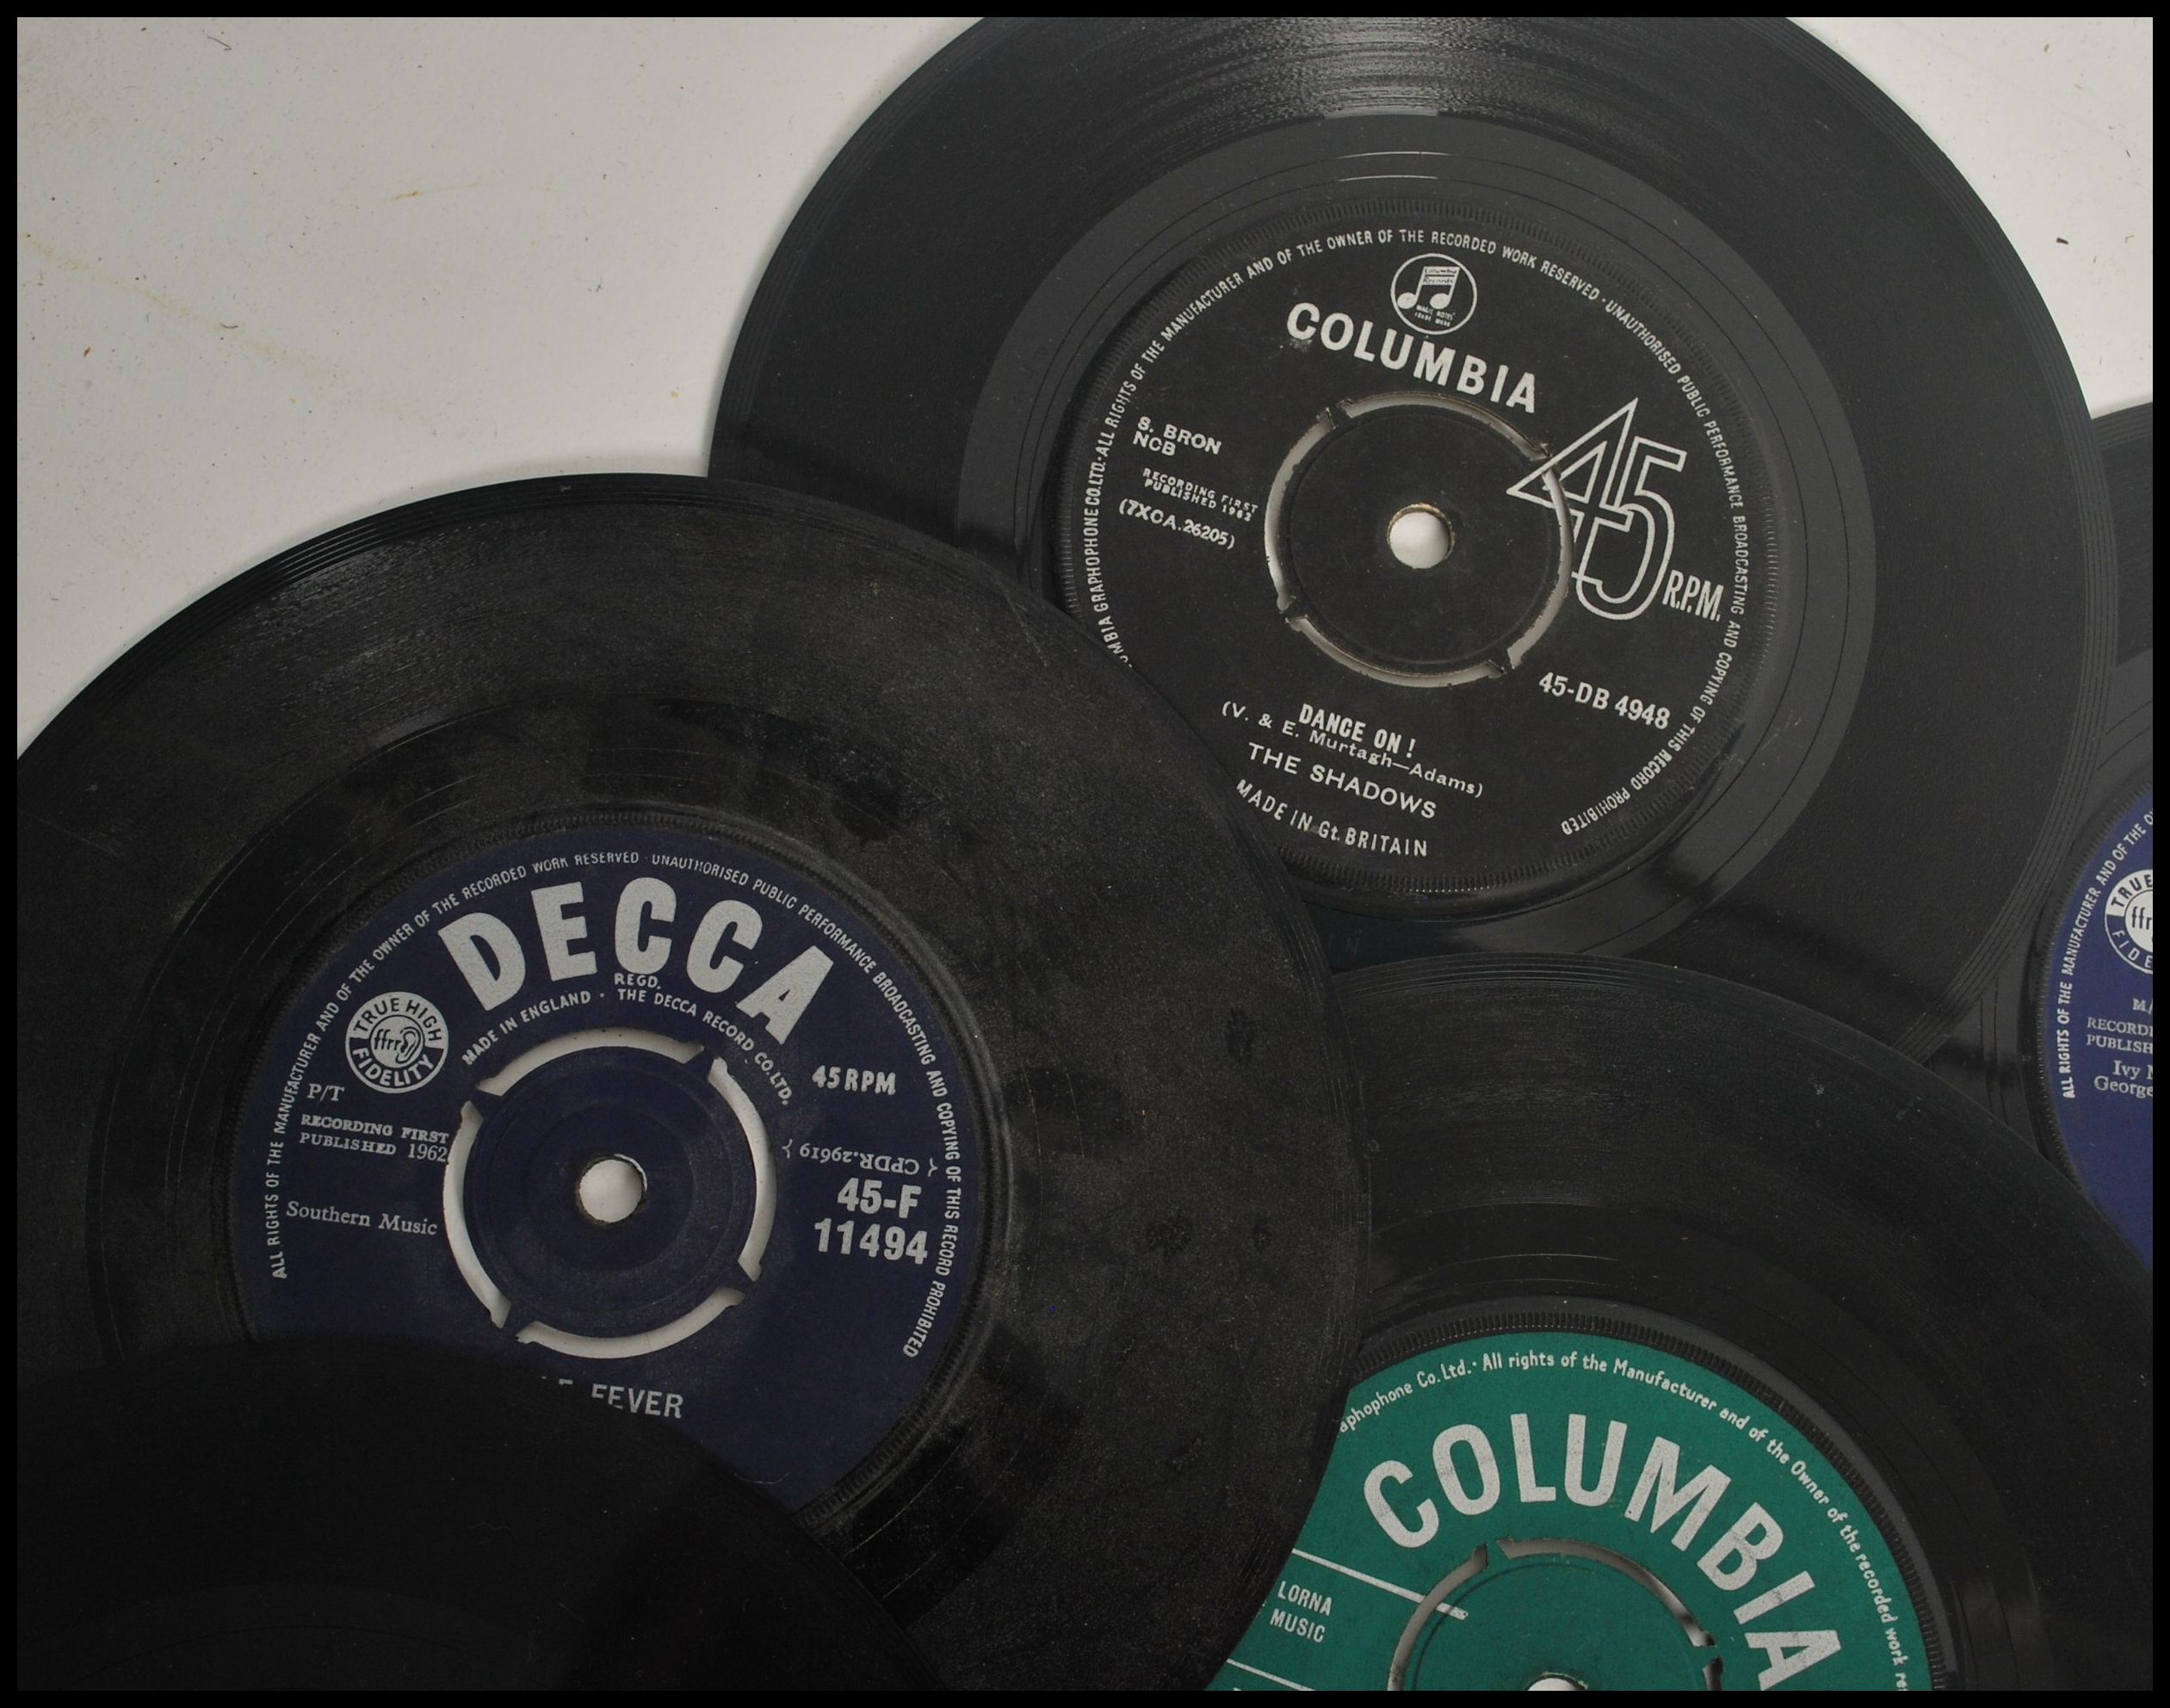 A collection of vinyl 7" 45rpm record singles dating from the 1960s featuring various artists and - Image 6 of 11